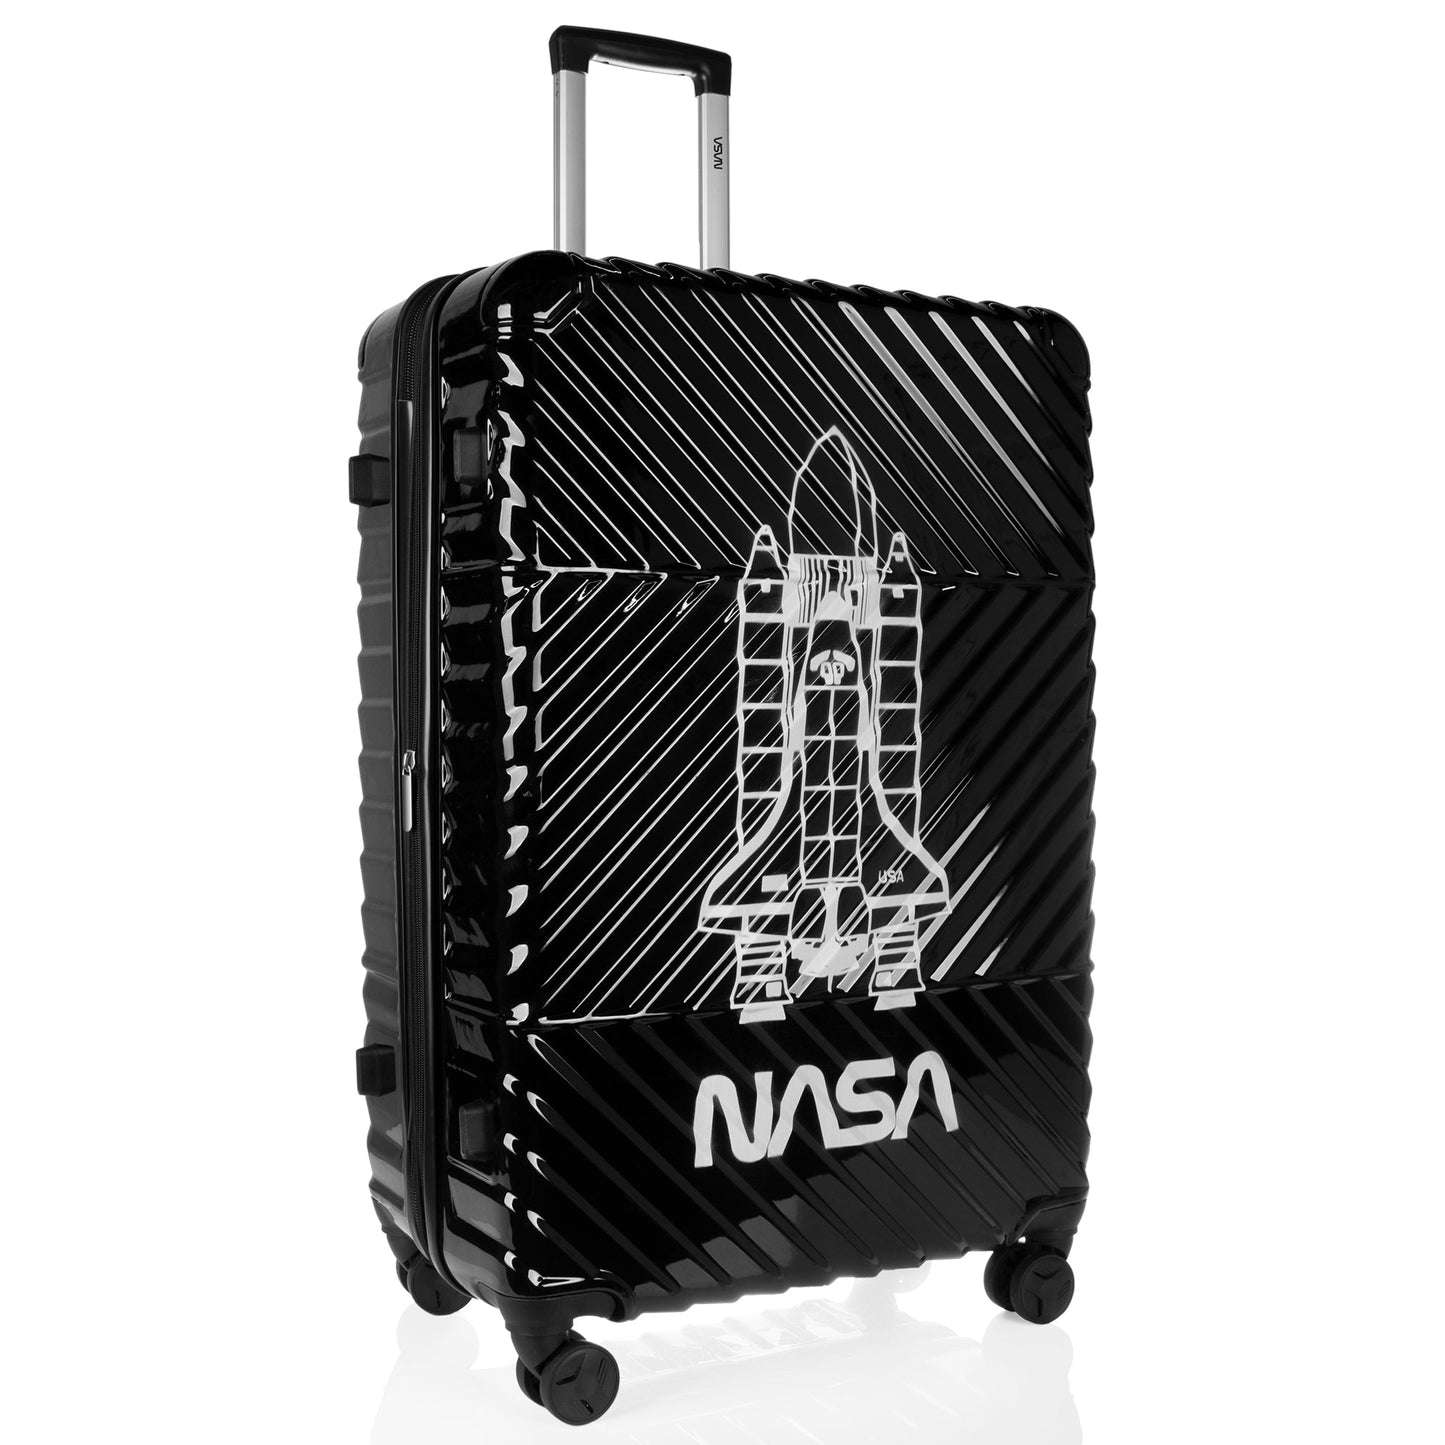 Space Shuttle Collection Black Luggage 3 Piece Set (21/25/29") Suitcase Lock Spinner Hardshell